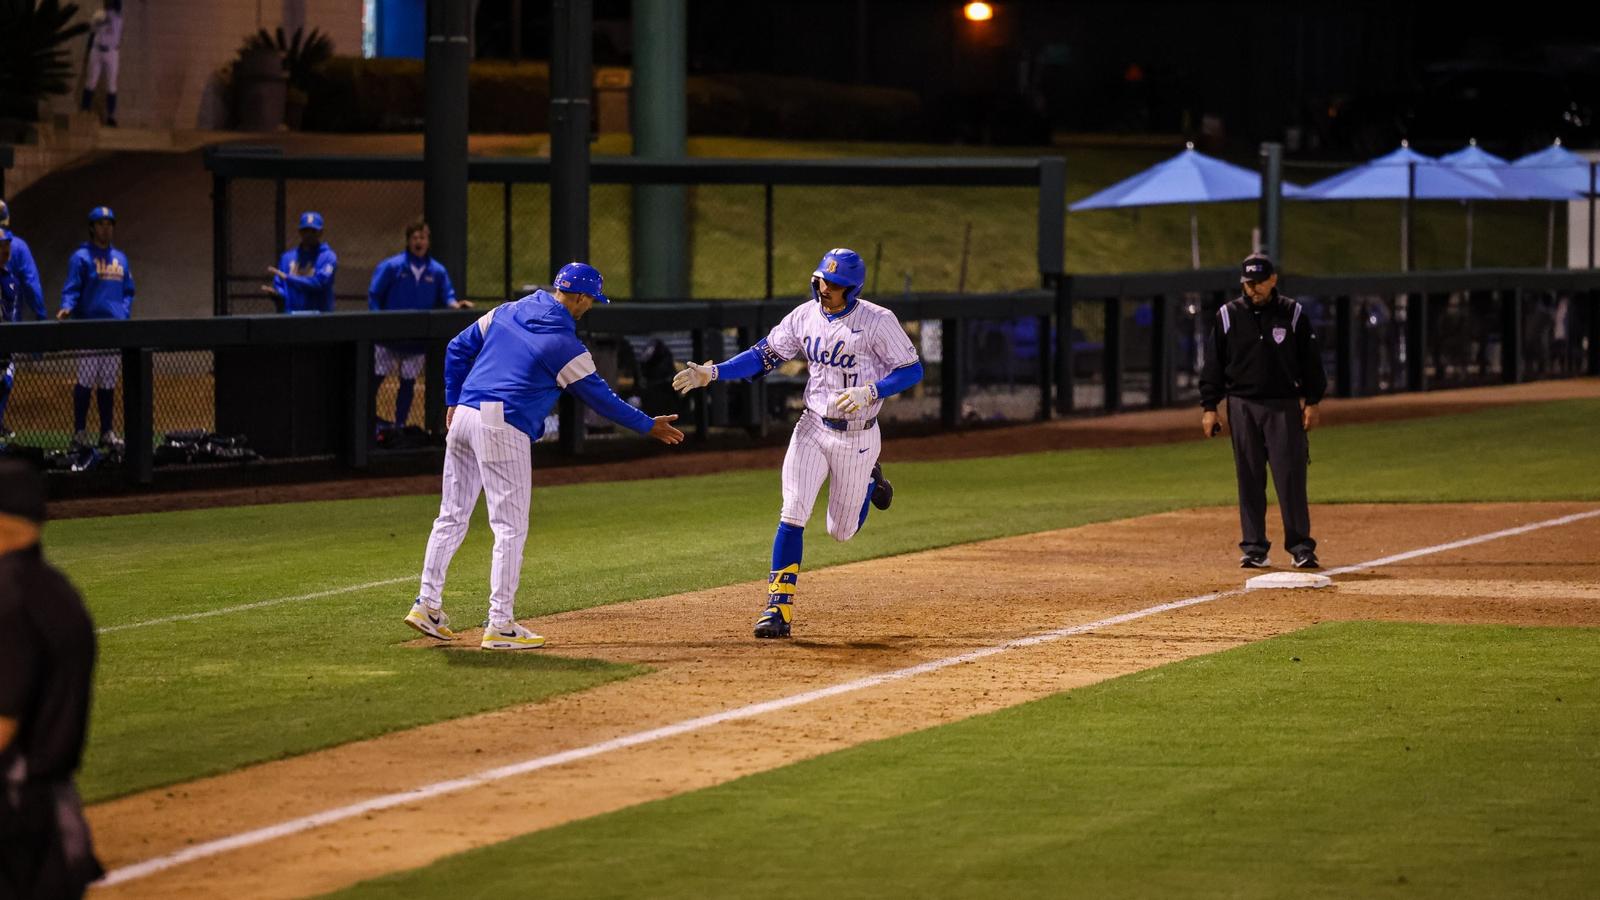 UCLA Baseball’s Cholowsky Shines with Two Homers in 9-7 Loss to UC Irvine